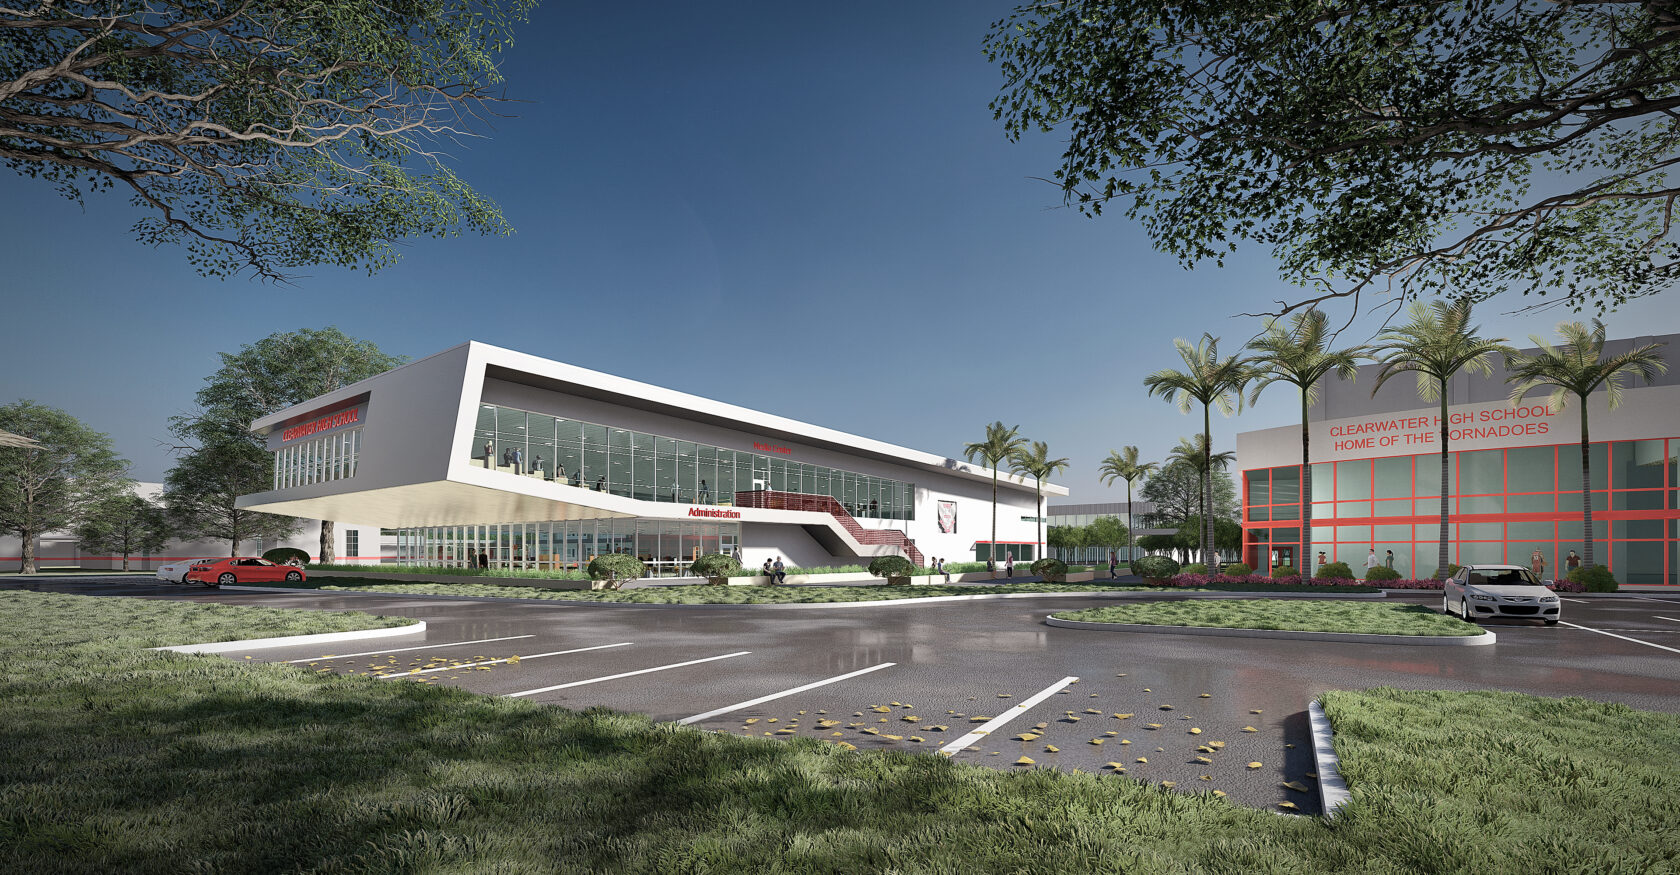 Exterior rendering of Clearwater High School viewed from the street